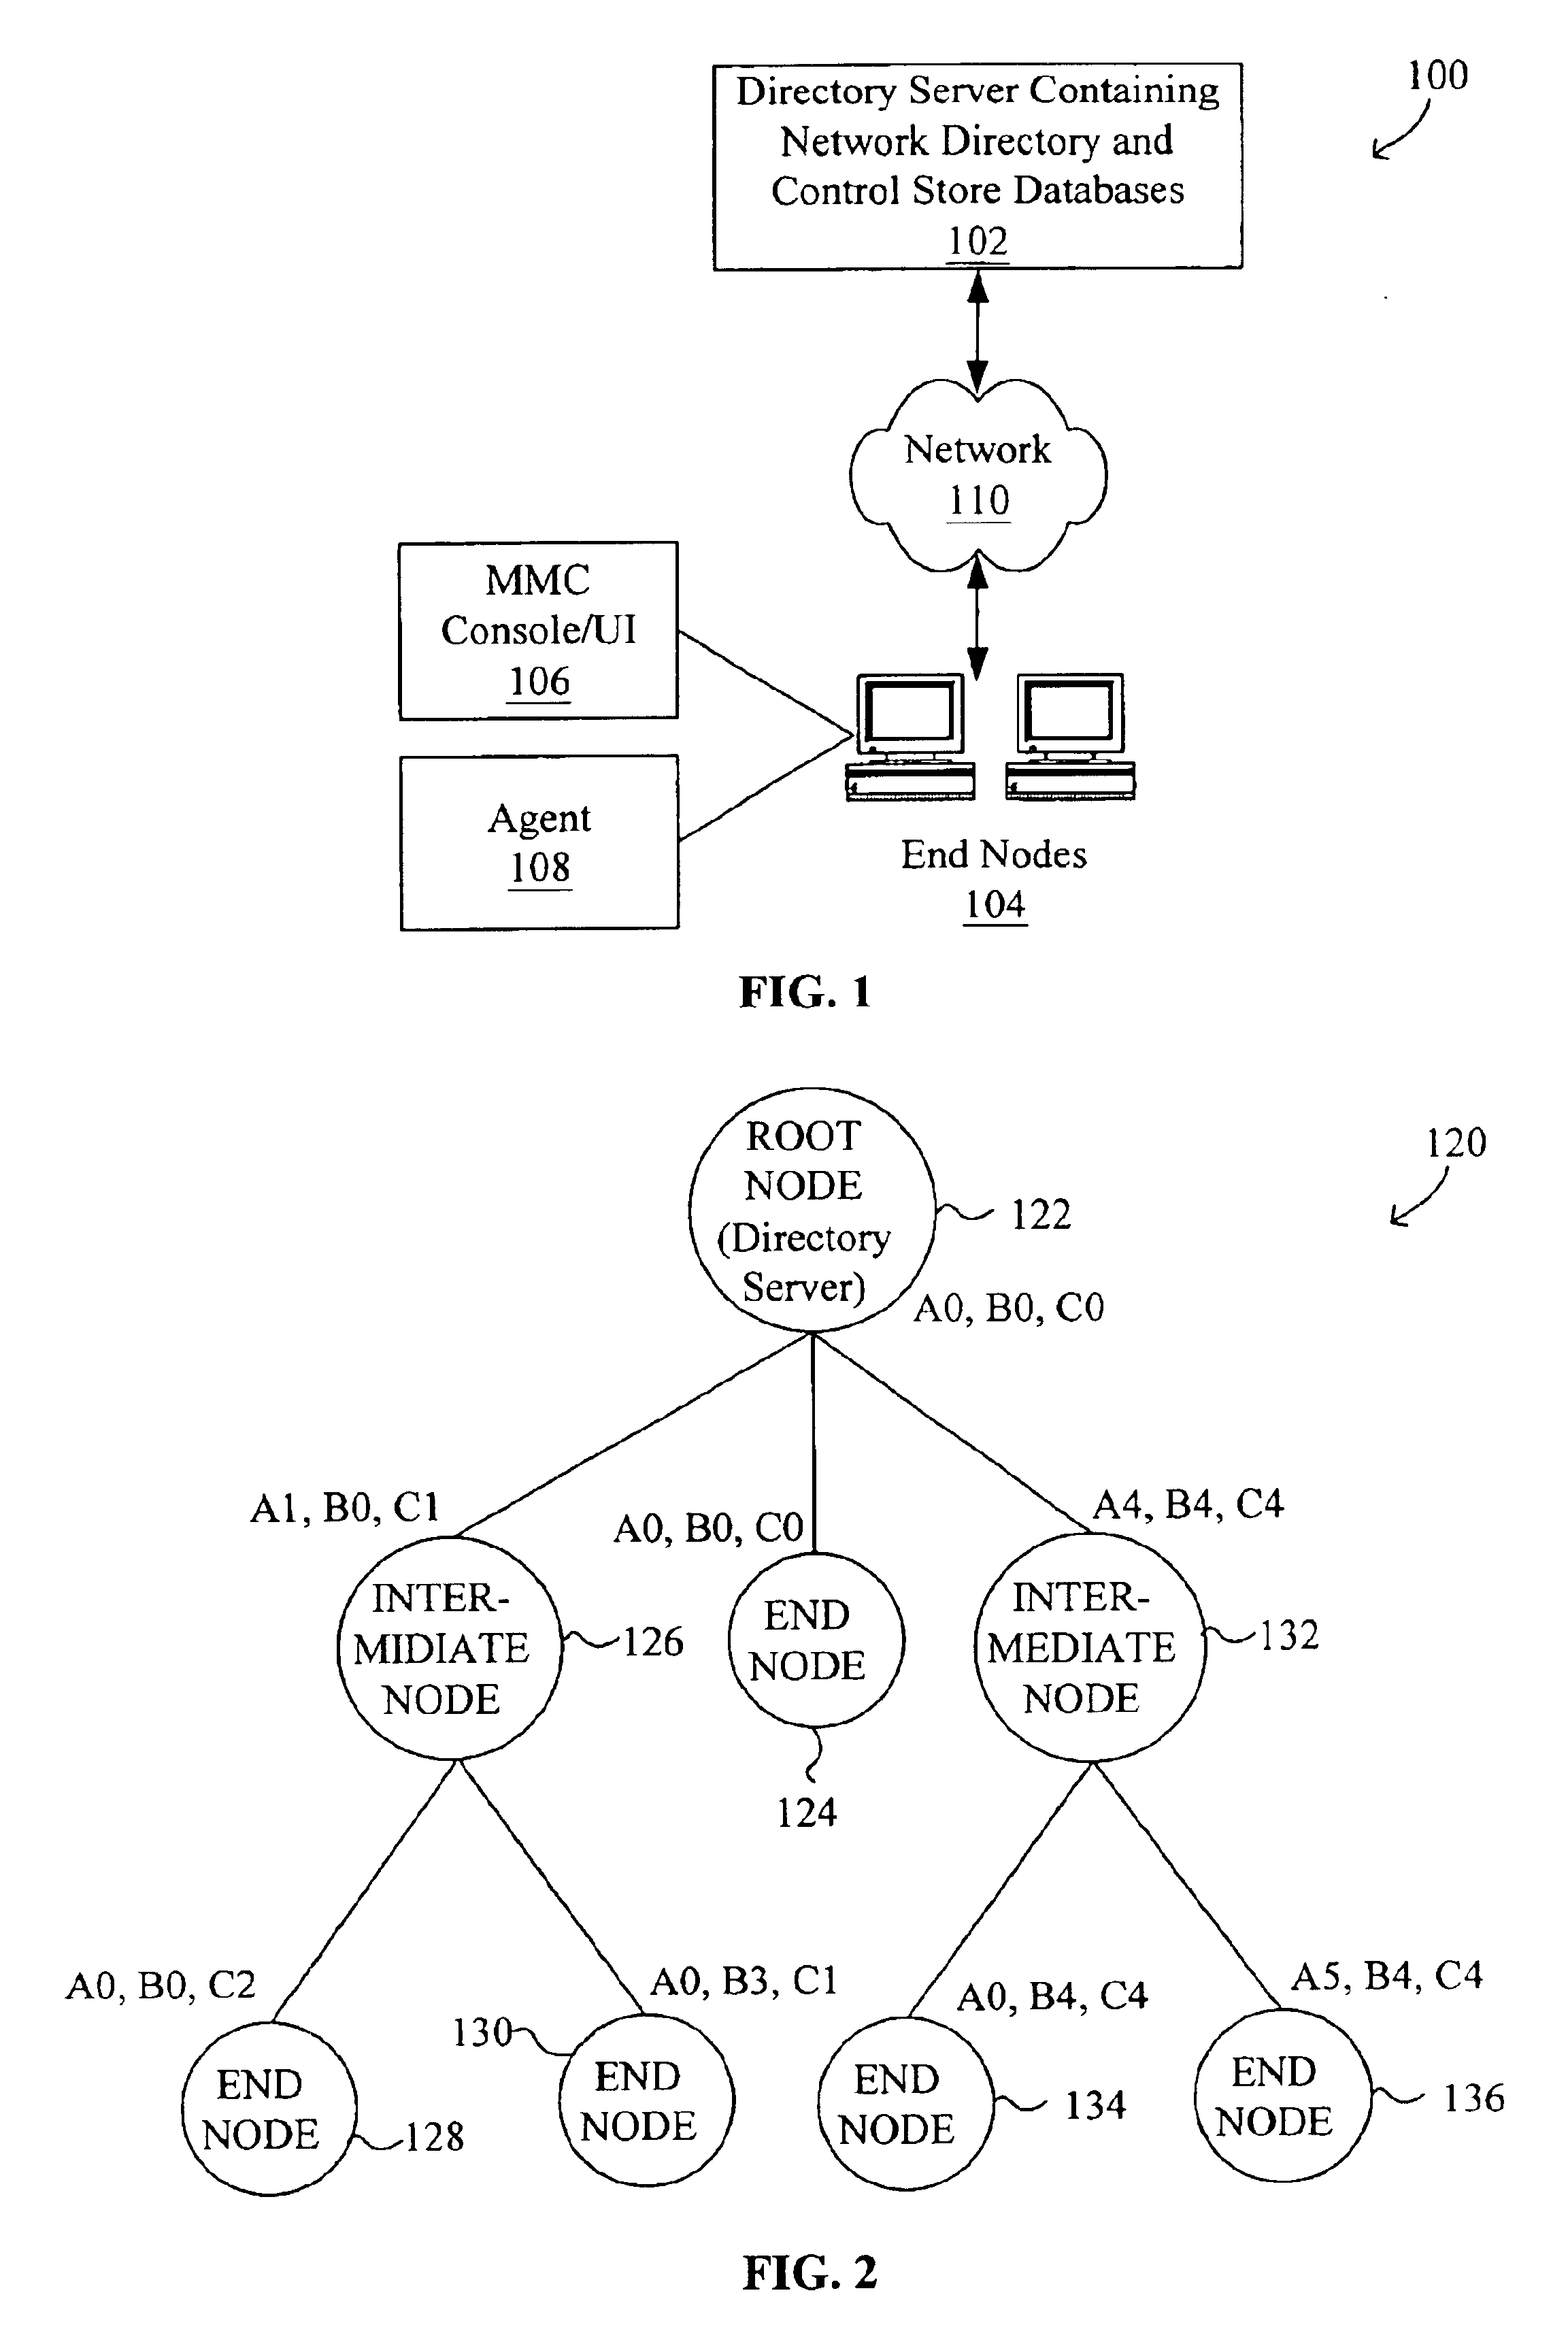 System and method for configuration, management, and monitoring of a computer network using inheritance